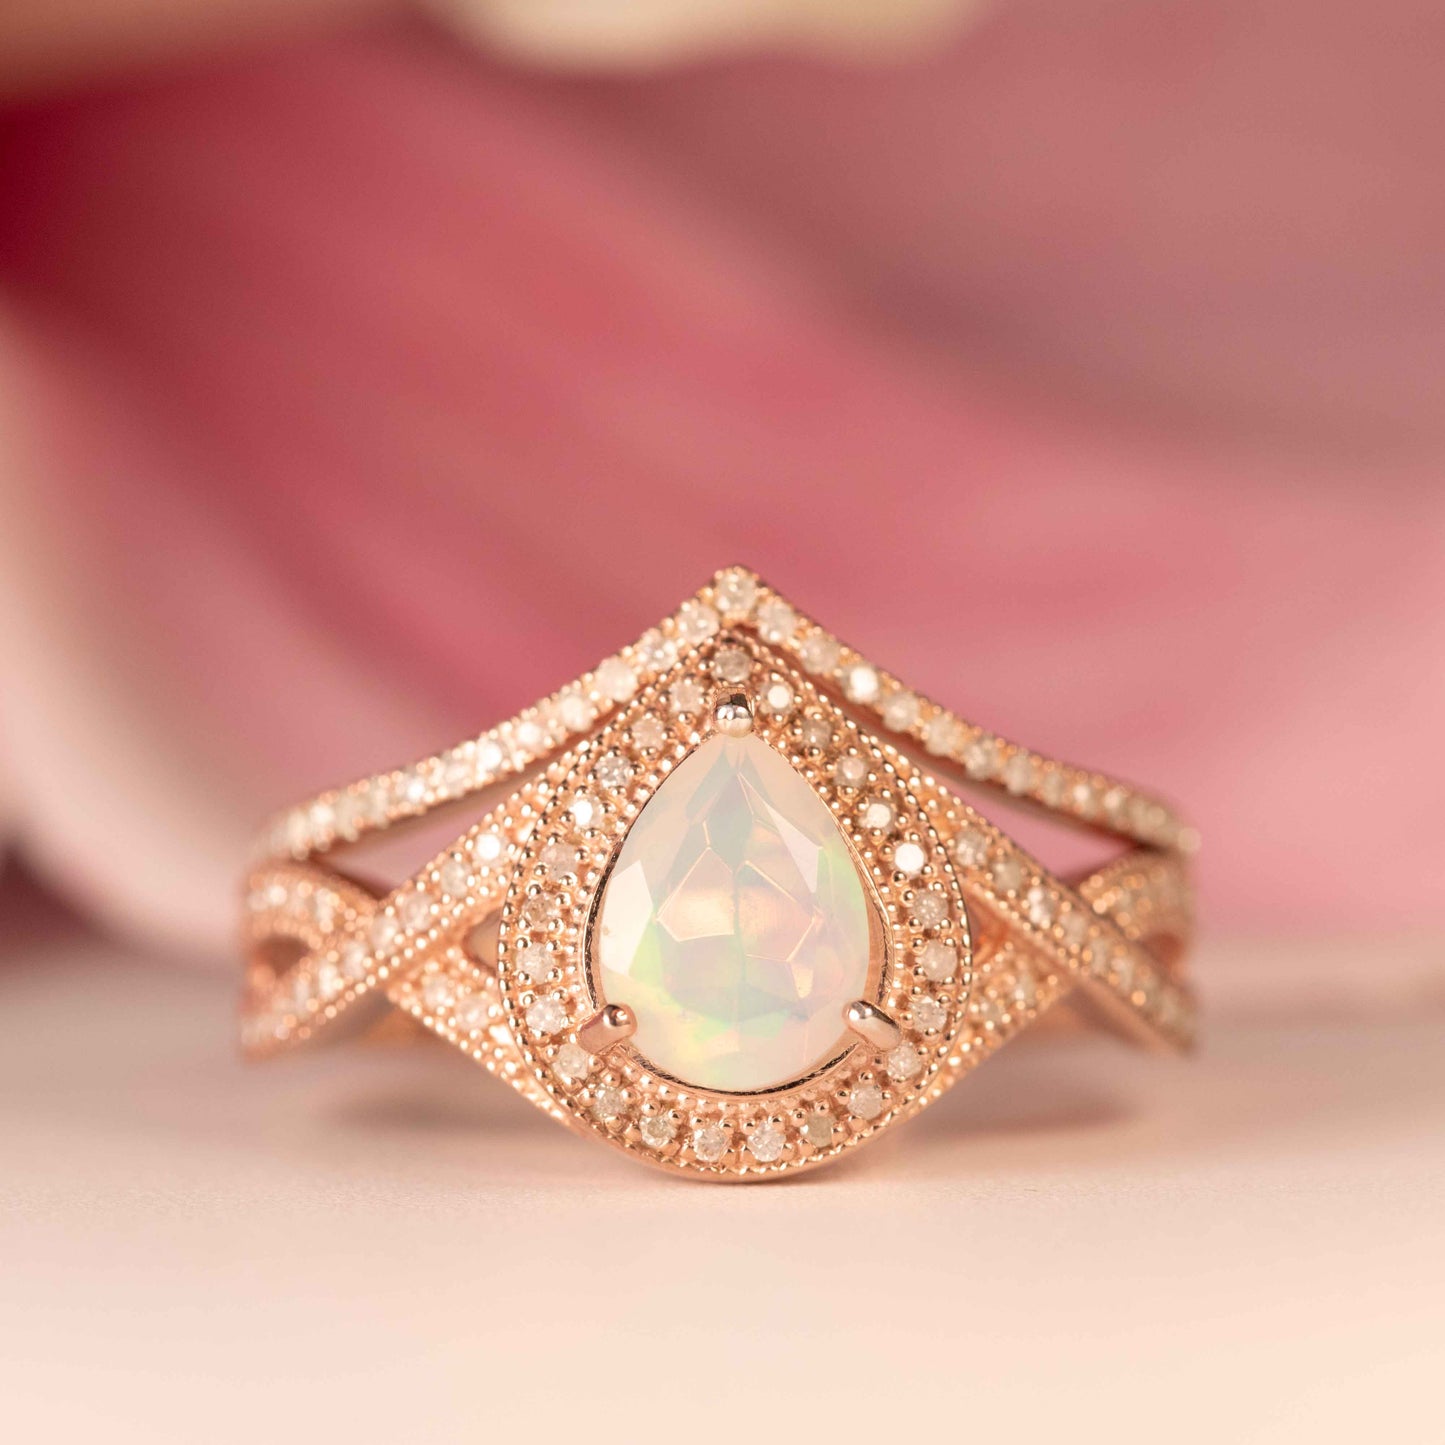 Huge 1.7 Carat Natural Fire Opal Halo Pear Shape Teardrop Vintage Chevron Wedding Ring Set with Diamond in Rose Gold